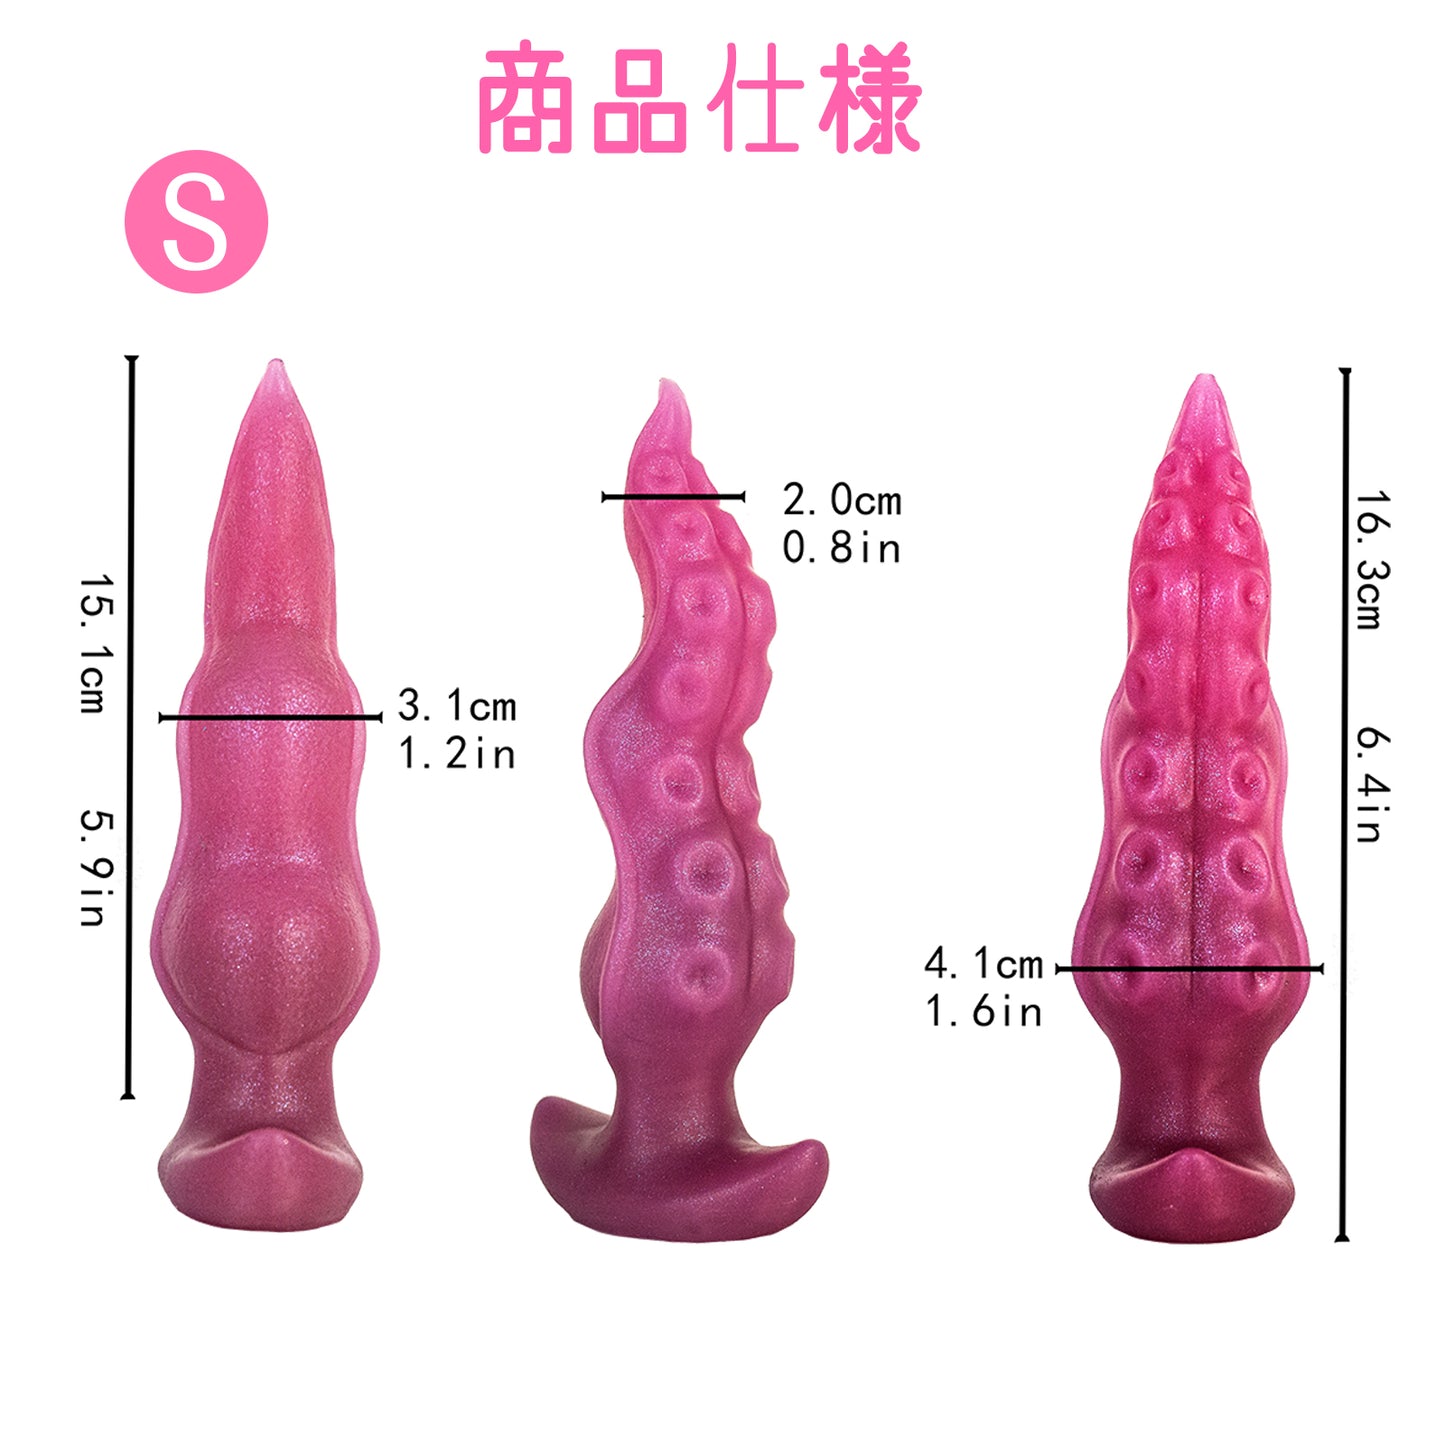 TARISS'S Anal plug Anchor -shaped pedestal silicon with unevenness